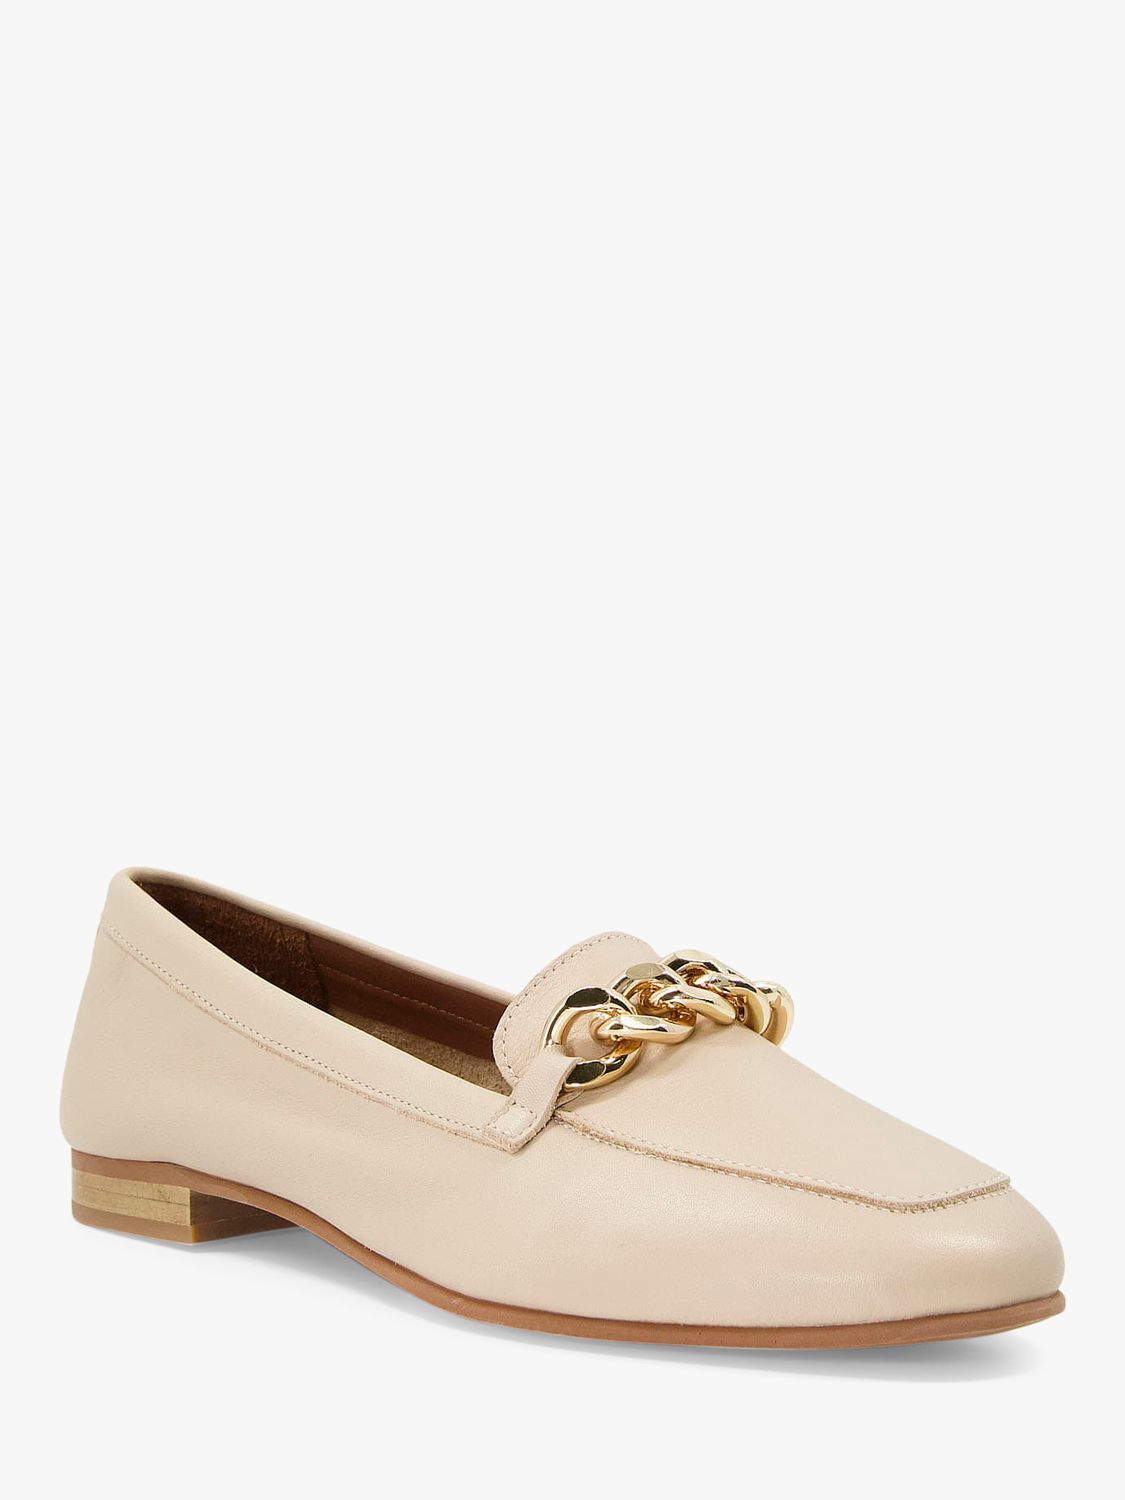 Dune Goldsmith Leather Chain Detail Loafers, Ecru, 3